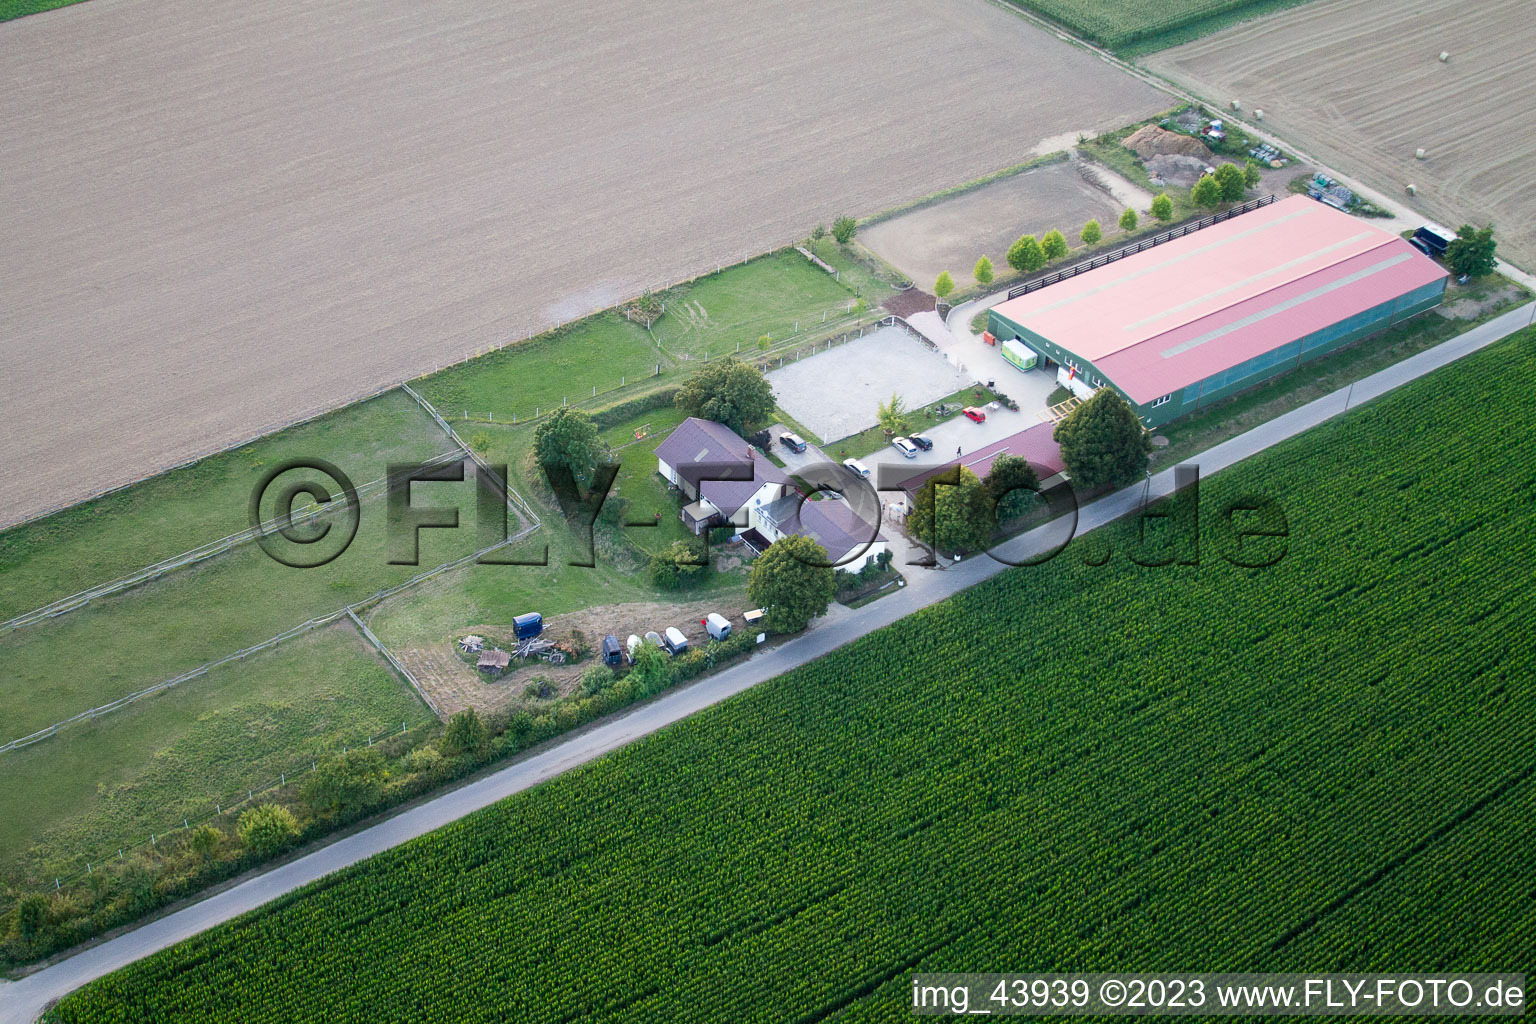 Foal yard in Steinweiler in the state Rhineland-Palatinate, Germany seen from above